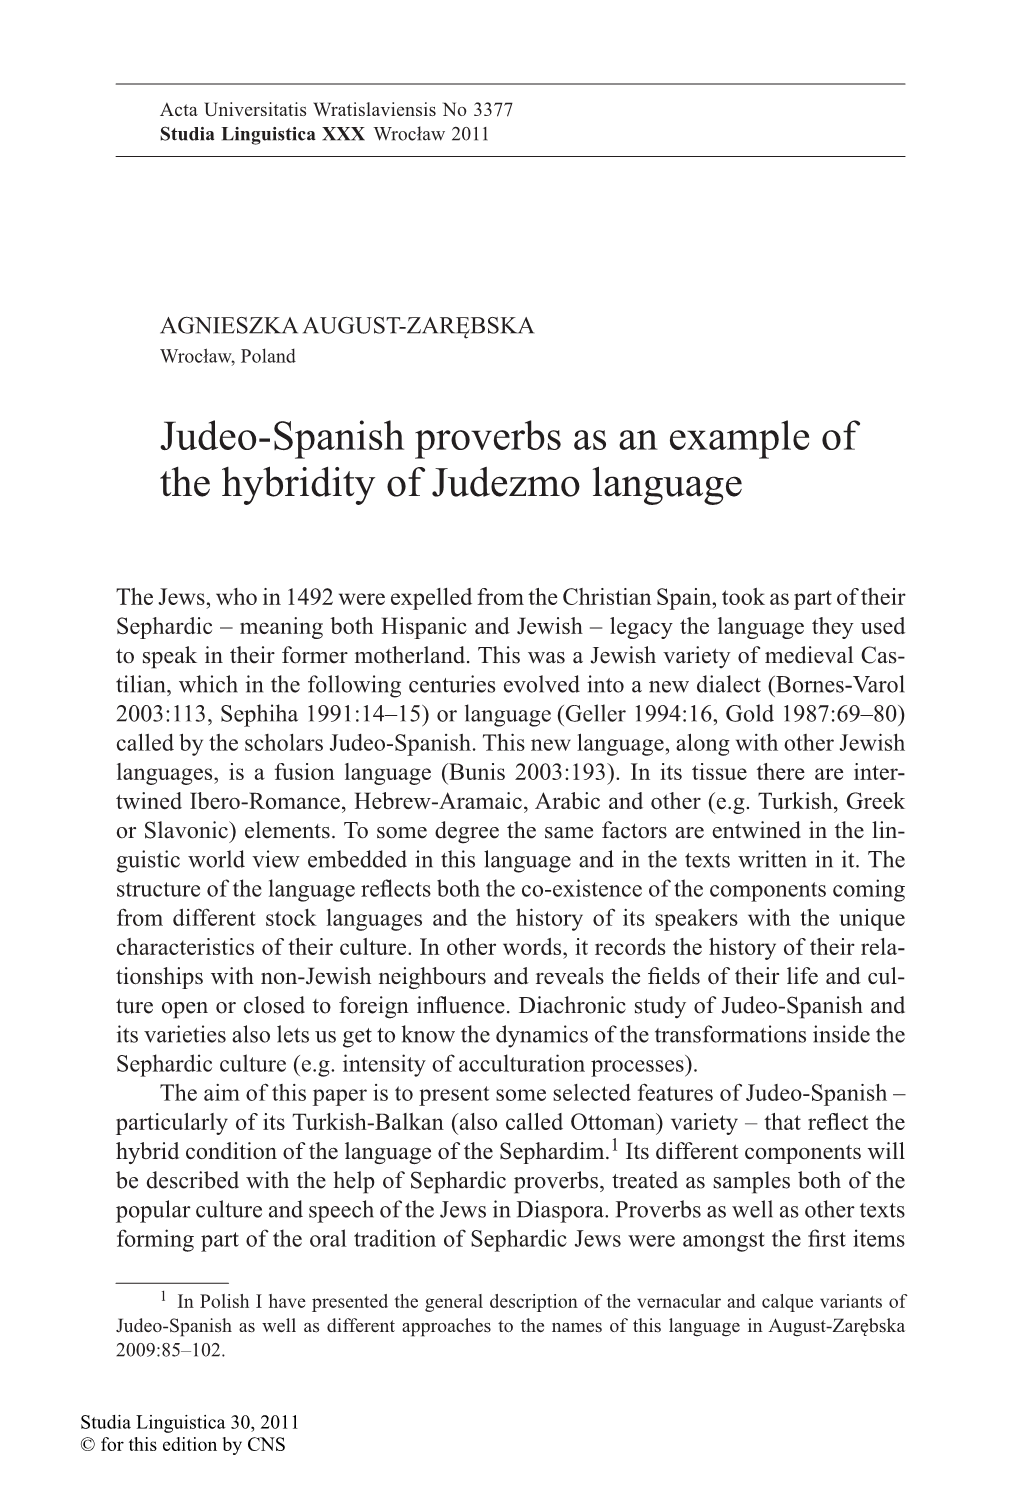 Judeo-Spanish Proverbs As an Example of the Hybridity of Judezmo Language